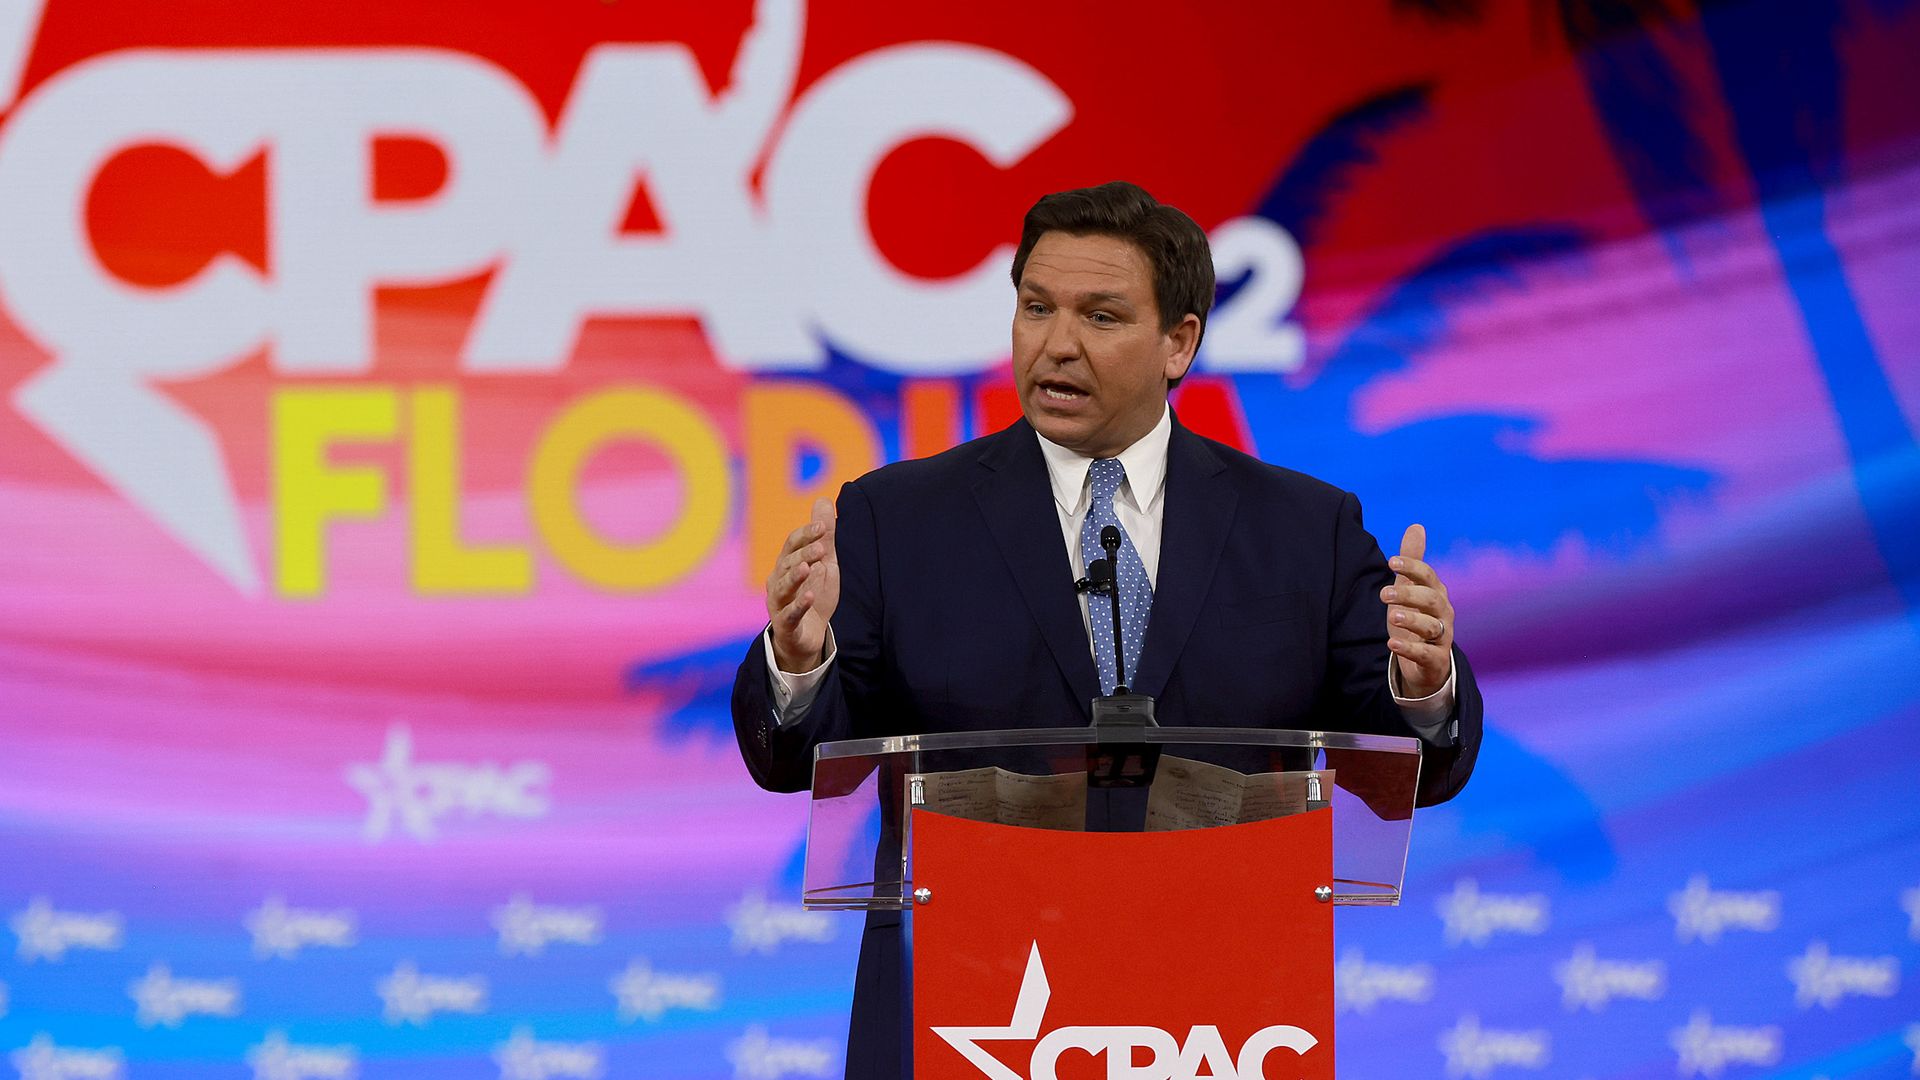 Florida Gov. Ron DeSantis speaks at the Conservative Political Action Conference (CPAC) at The Rosen Shingle Creek on February 24, 2022 in Orlando, Florida.